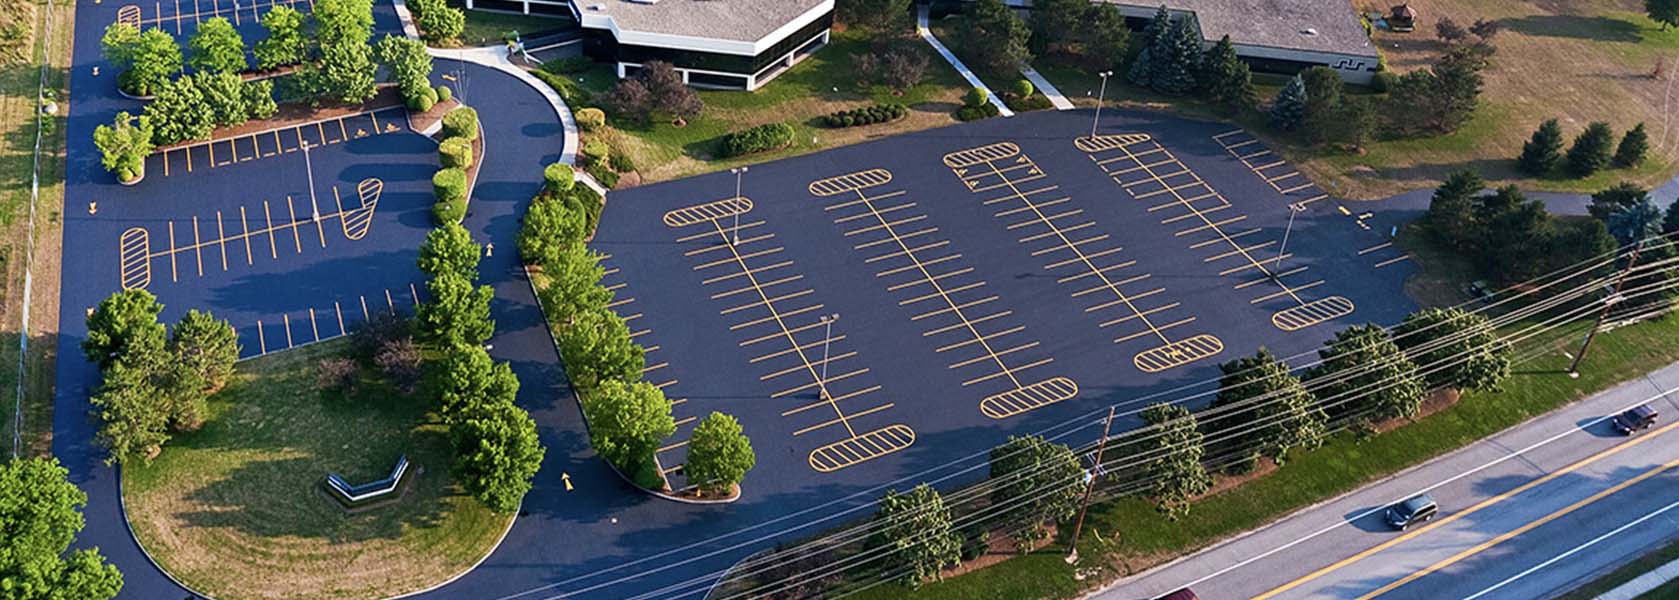 Driveway paving services by North Coast Property Maintenance in Rochester, NY